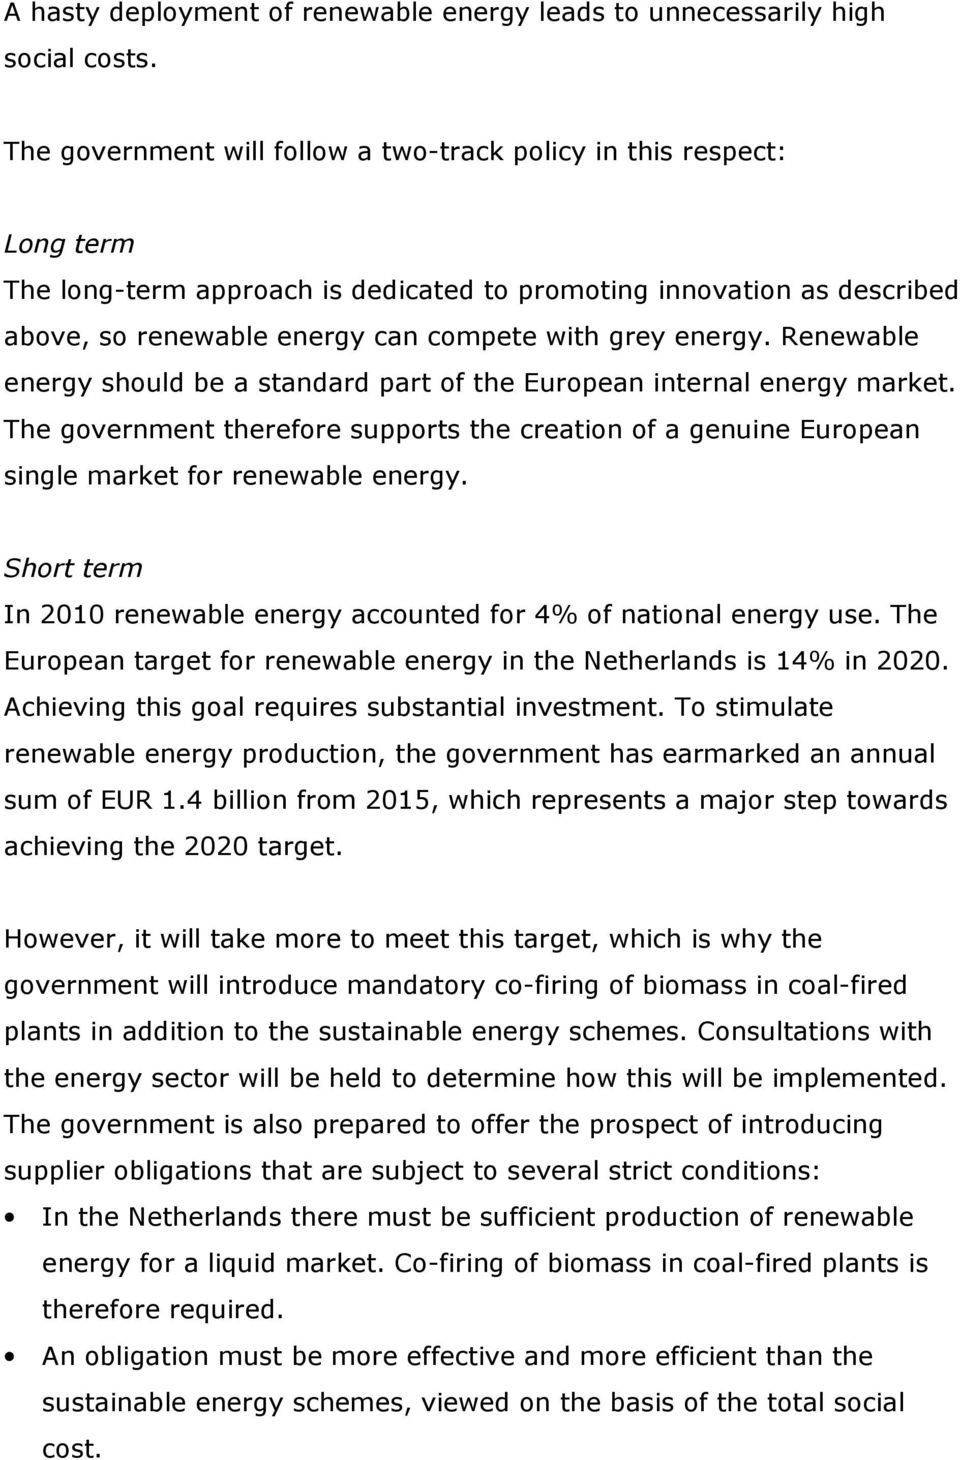 energy. Renewable energy should be a standard part of the European internal energy market. The government therefore supports the creation of a genuine European single market for renewable energy.